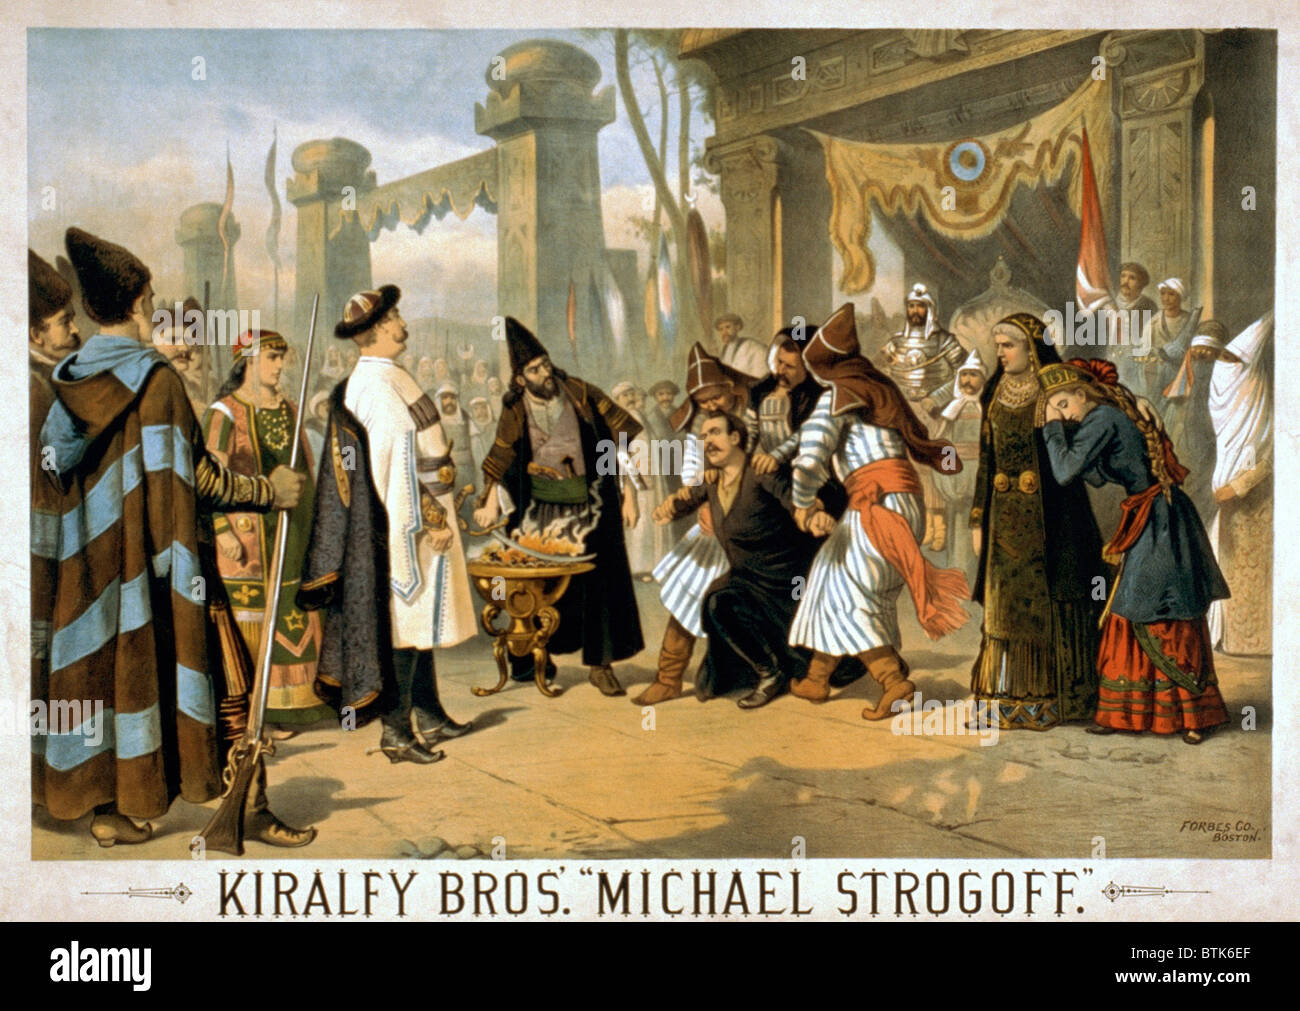 1882 Poster for MICHAEL STORGOFF; THE COURIER OF THE CZAR, shows the scene in which the Tatar king Feofar Khan prepares to blind Michael Strogoff with a hot iron. The Kiralfy brothers, Bolossy (1848-1932) and Imre (1849-1919), specialized in the production of extravagantly spectacular stage productions. Stock Photo